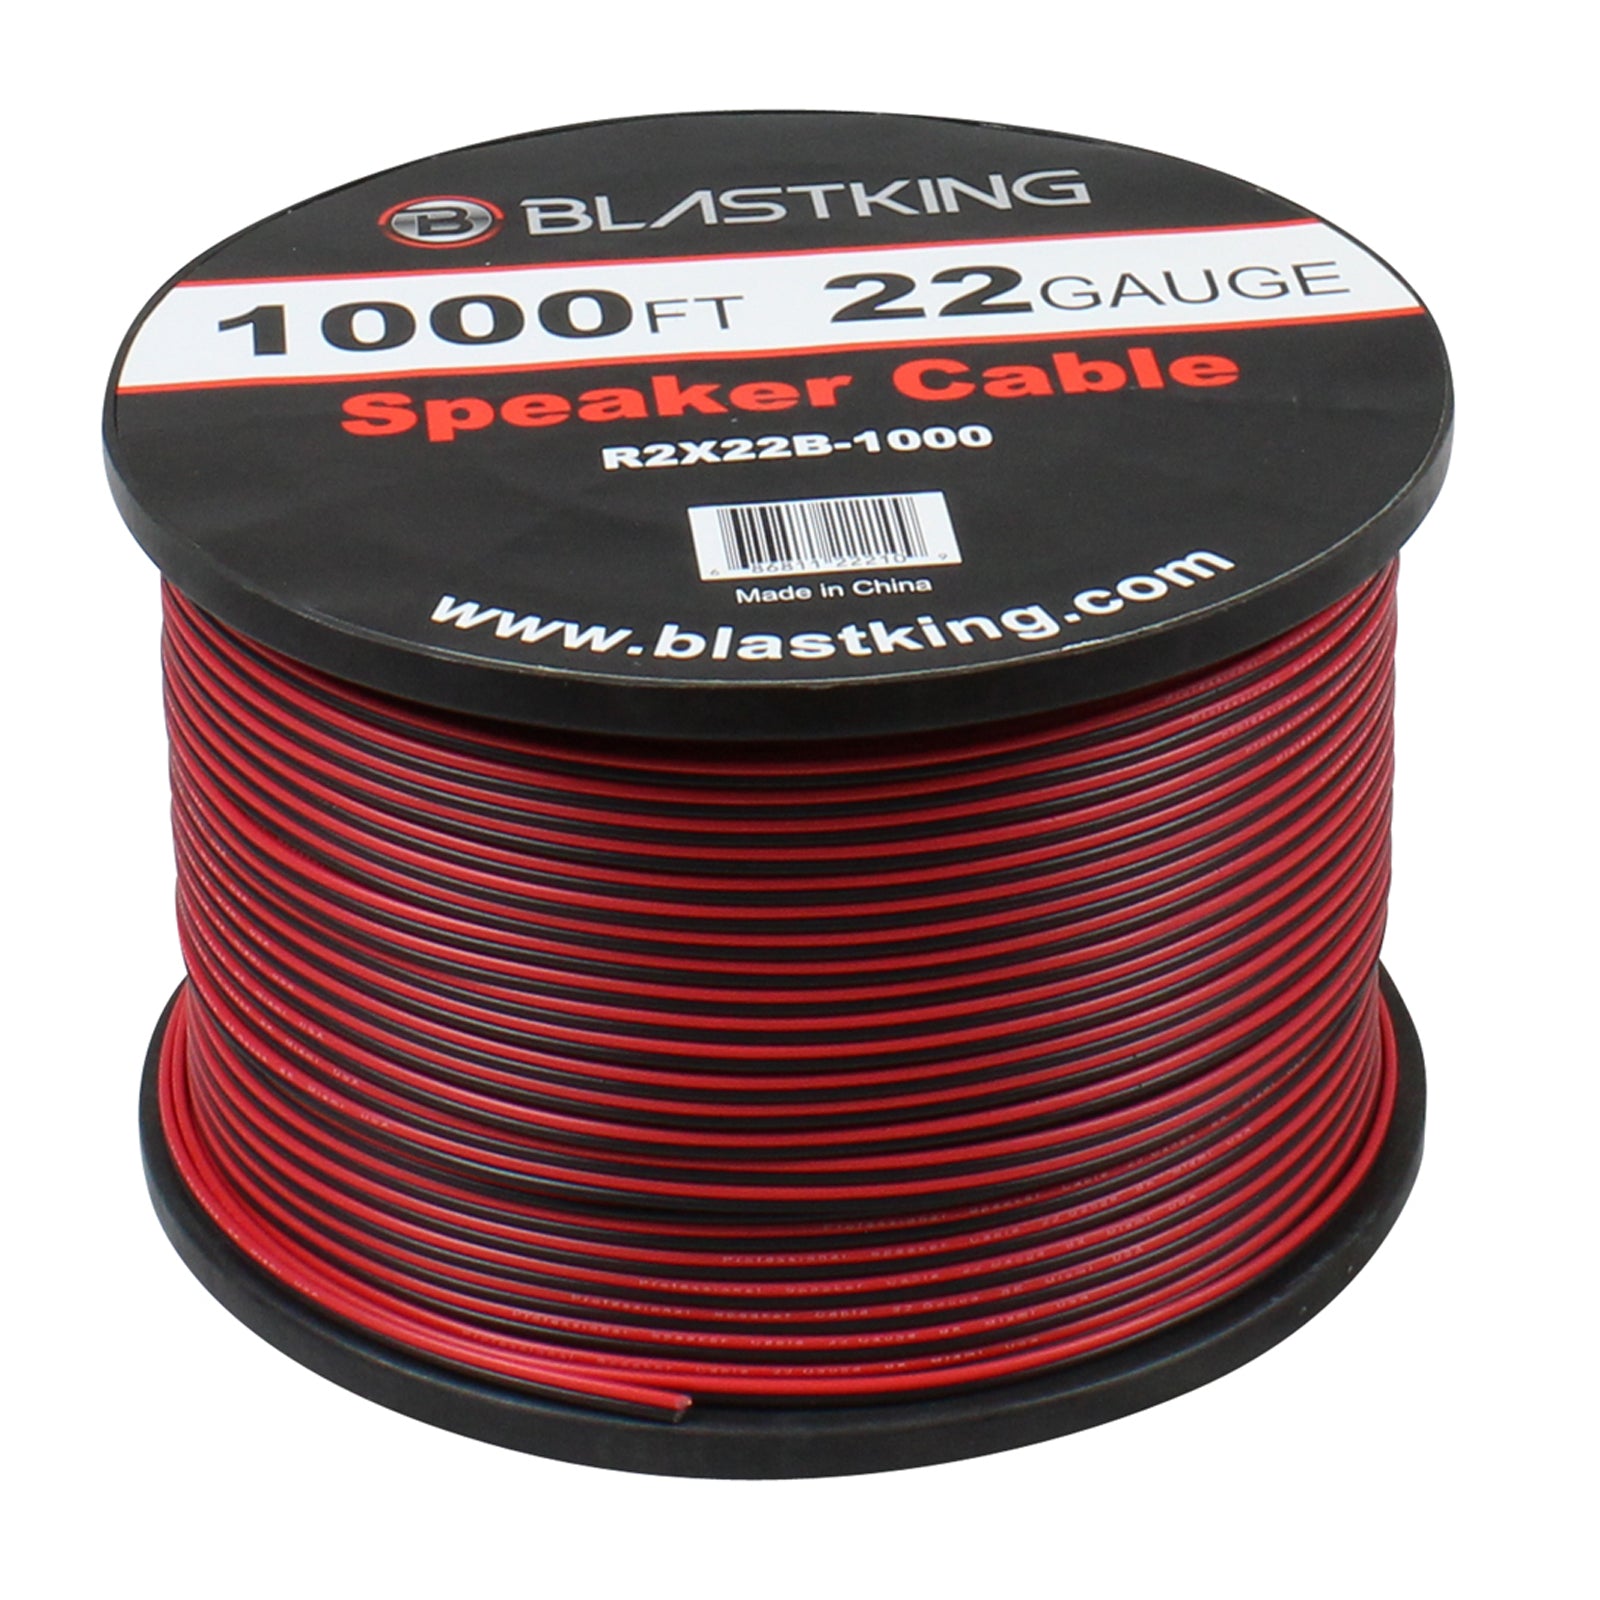 Blastking R2X22B-1000 22 AWG 2-Conductor Speaker Cable 1000 Ft